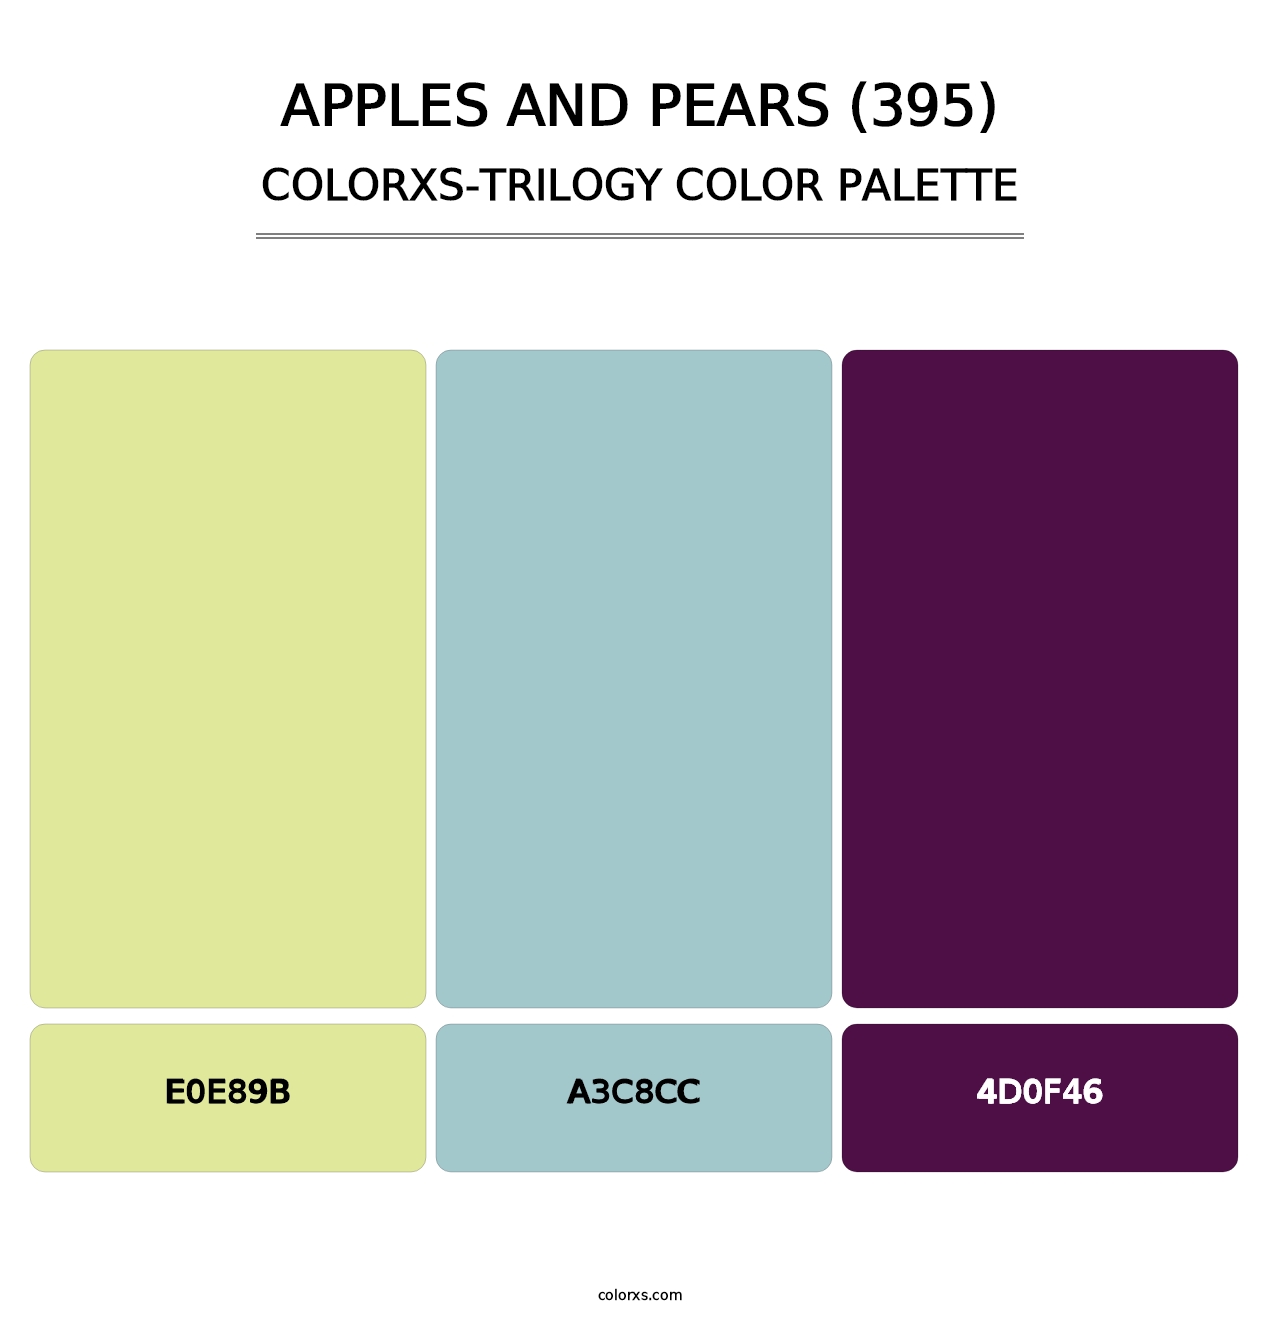 Apples and Pears (395) - Colorxs Trilogy Palette